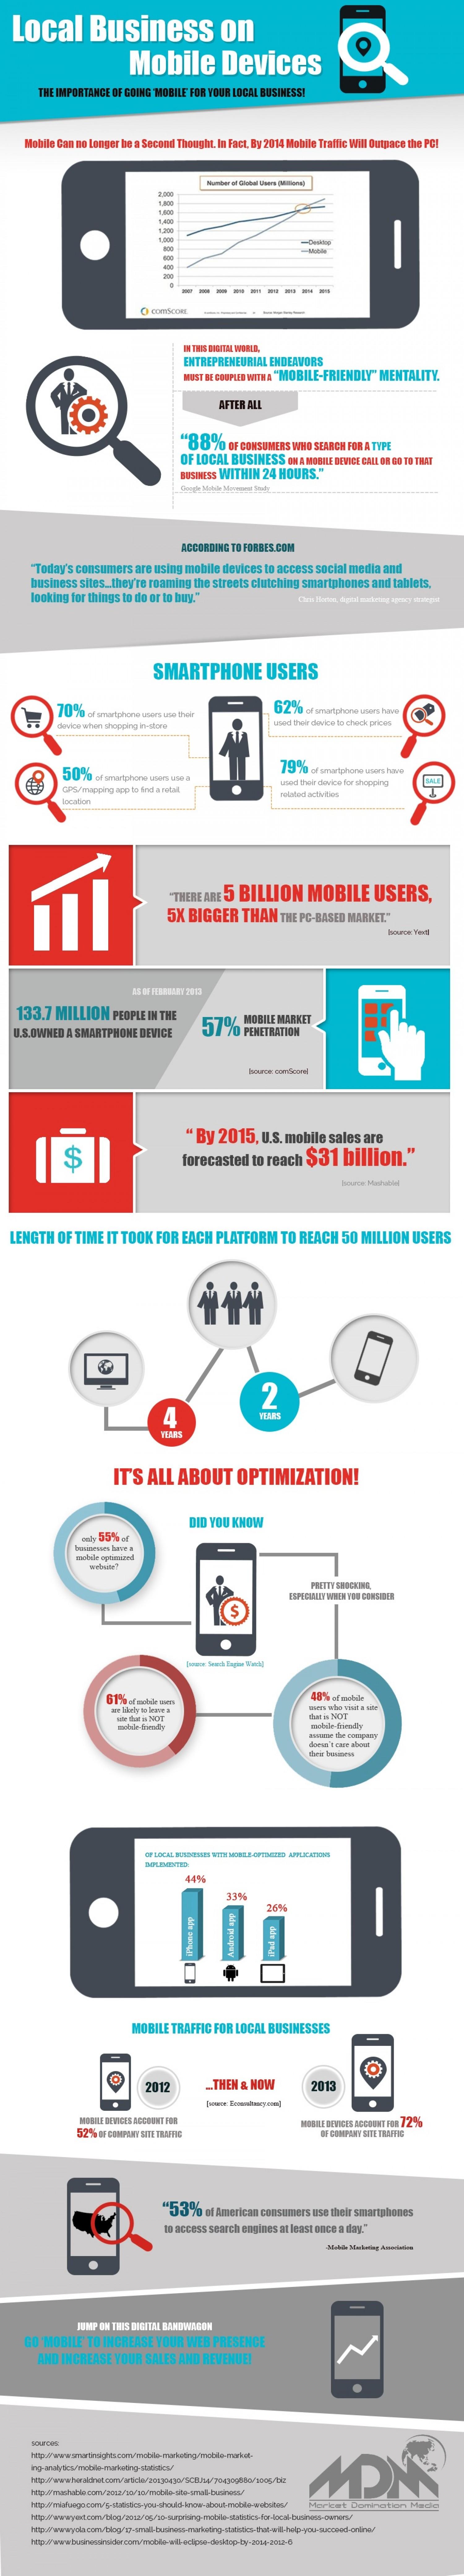 Why Your Business Should Go Mobile in 2014 [Infographic]